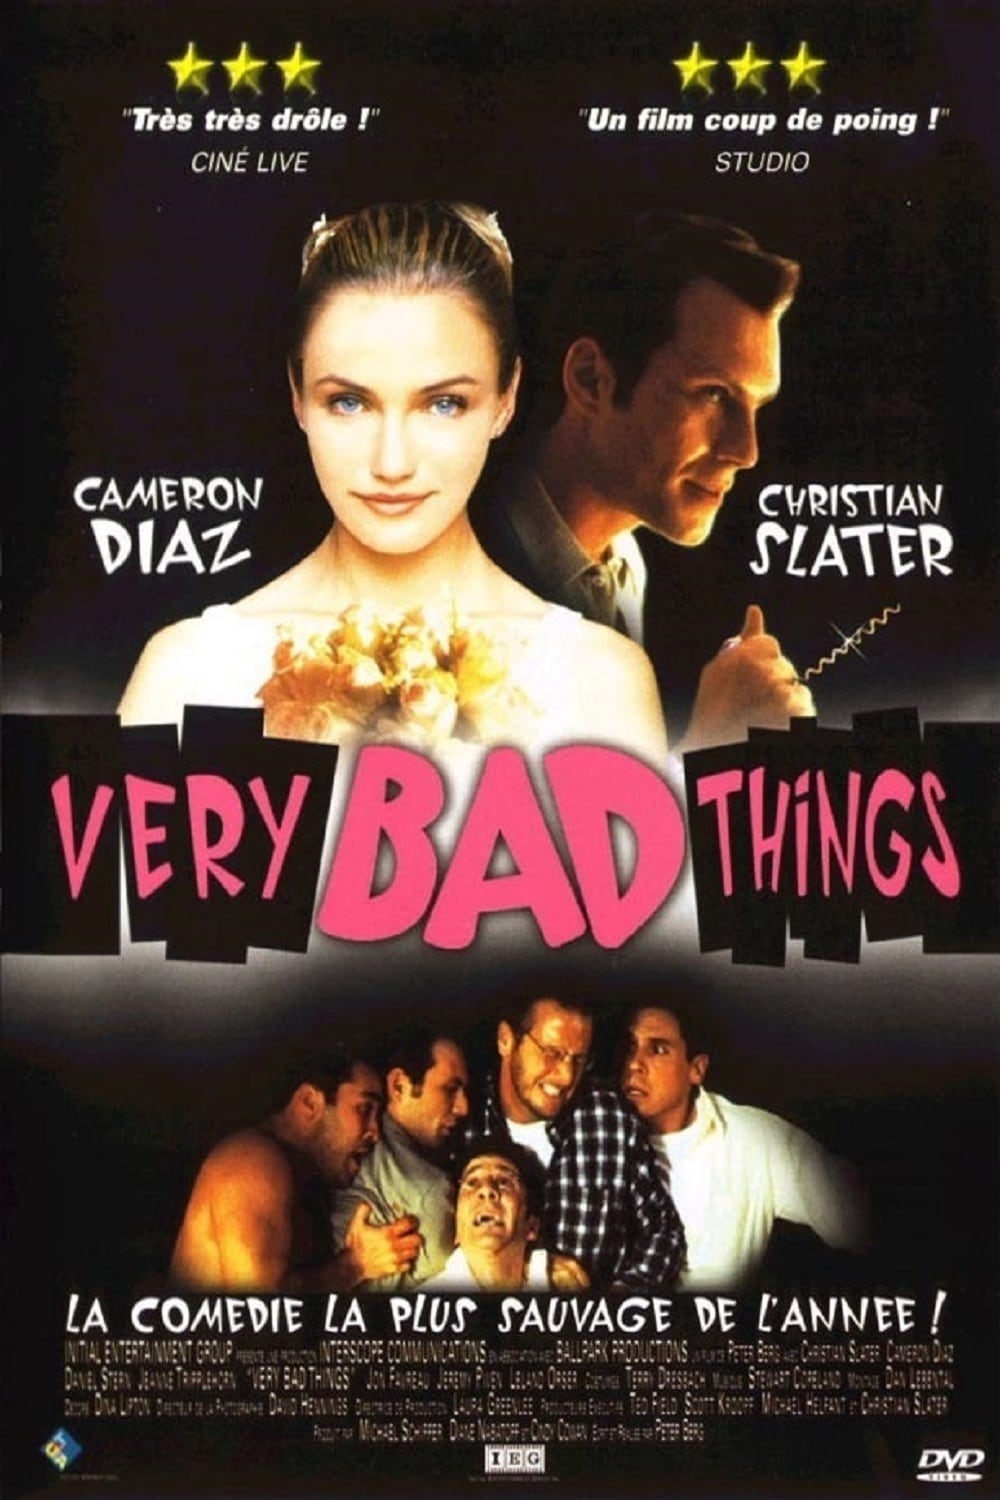 Affiche du film "Very bad things"